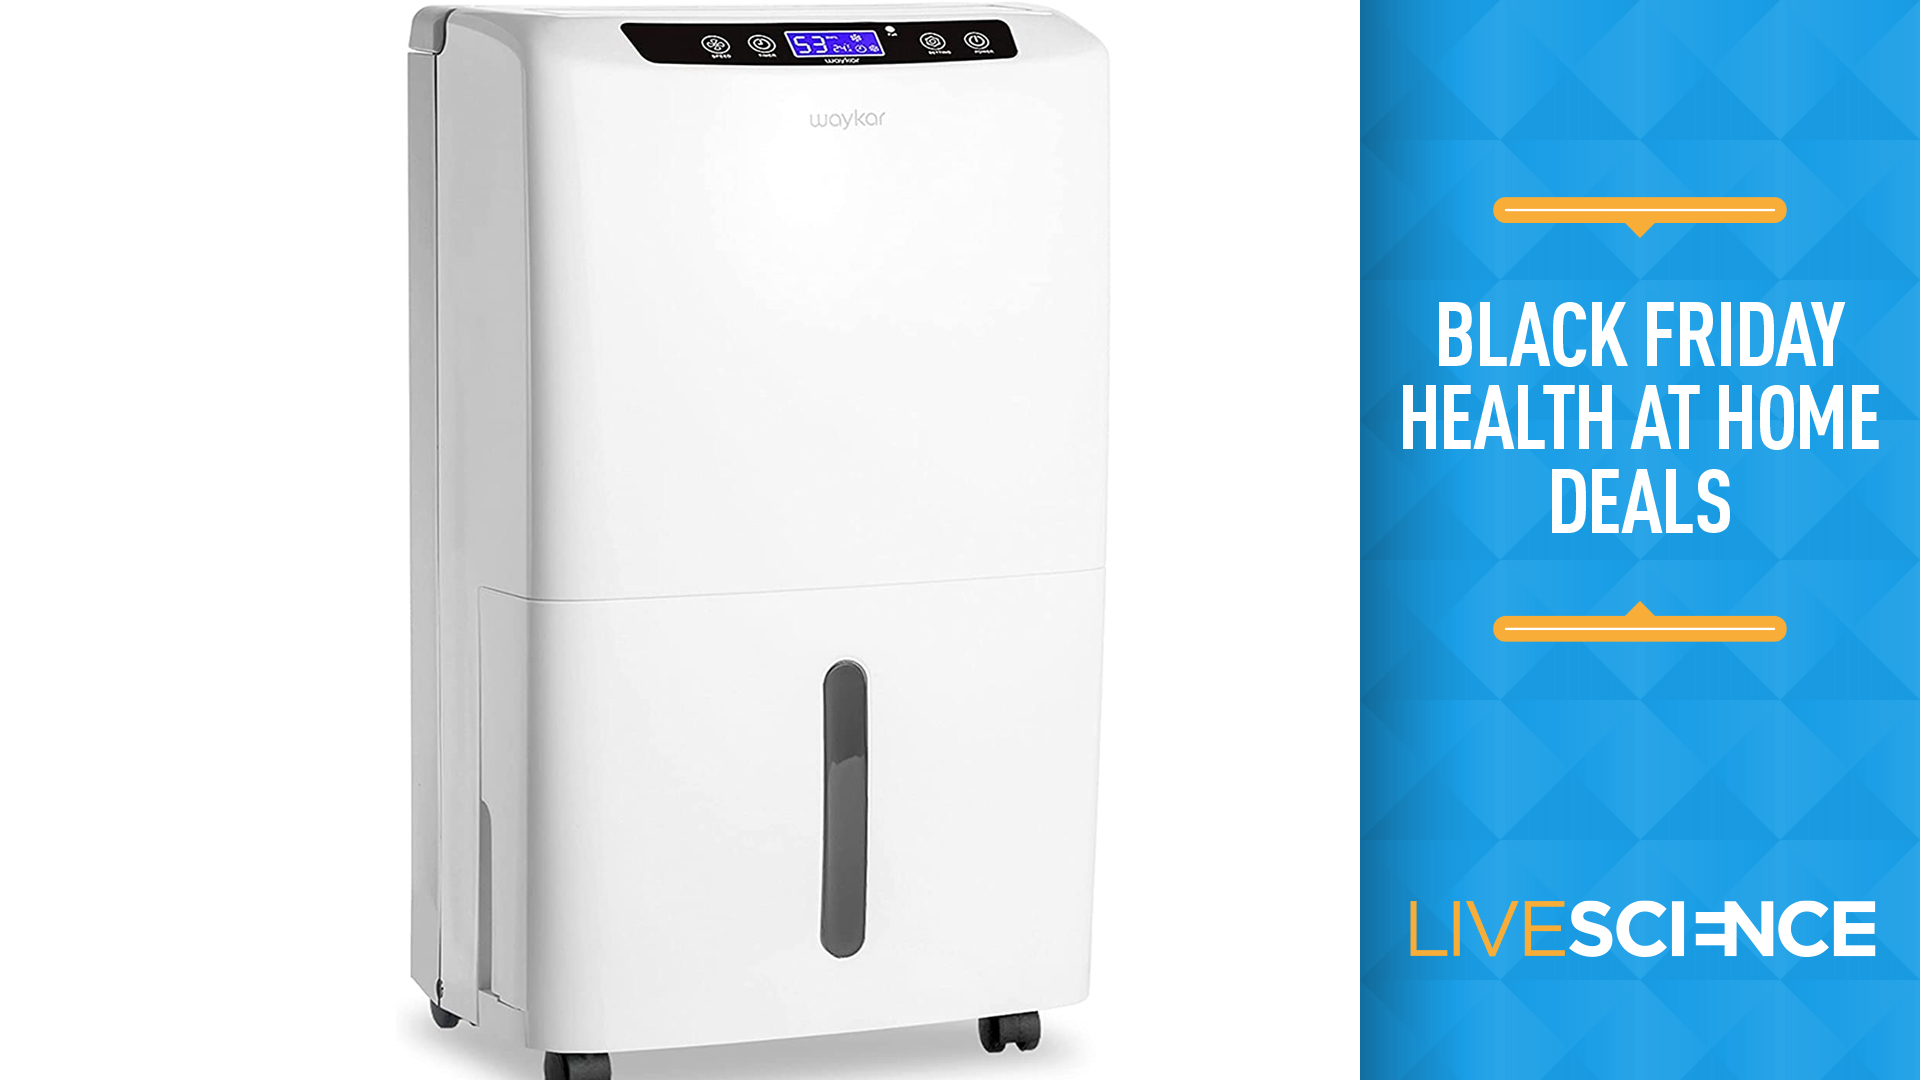 Black Friday deal: Save $80 on this Waykar dehumidifier rated for 2,000 square feet